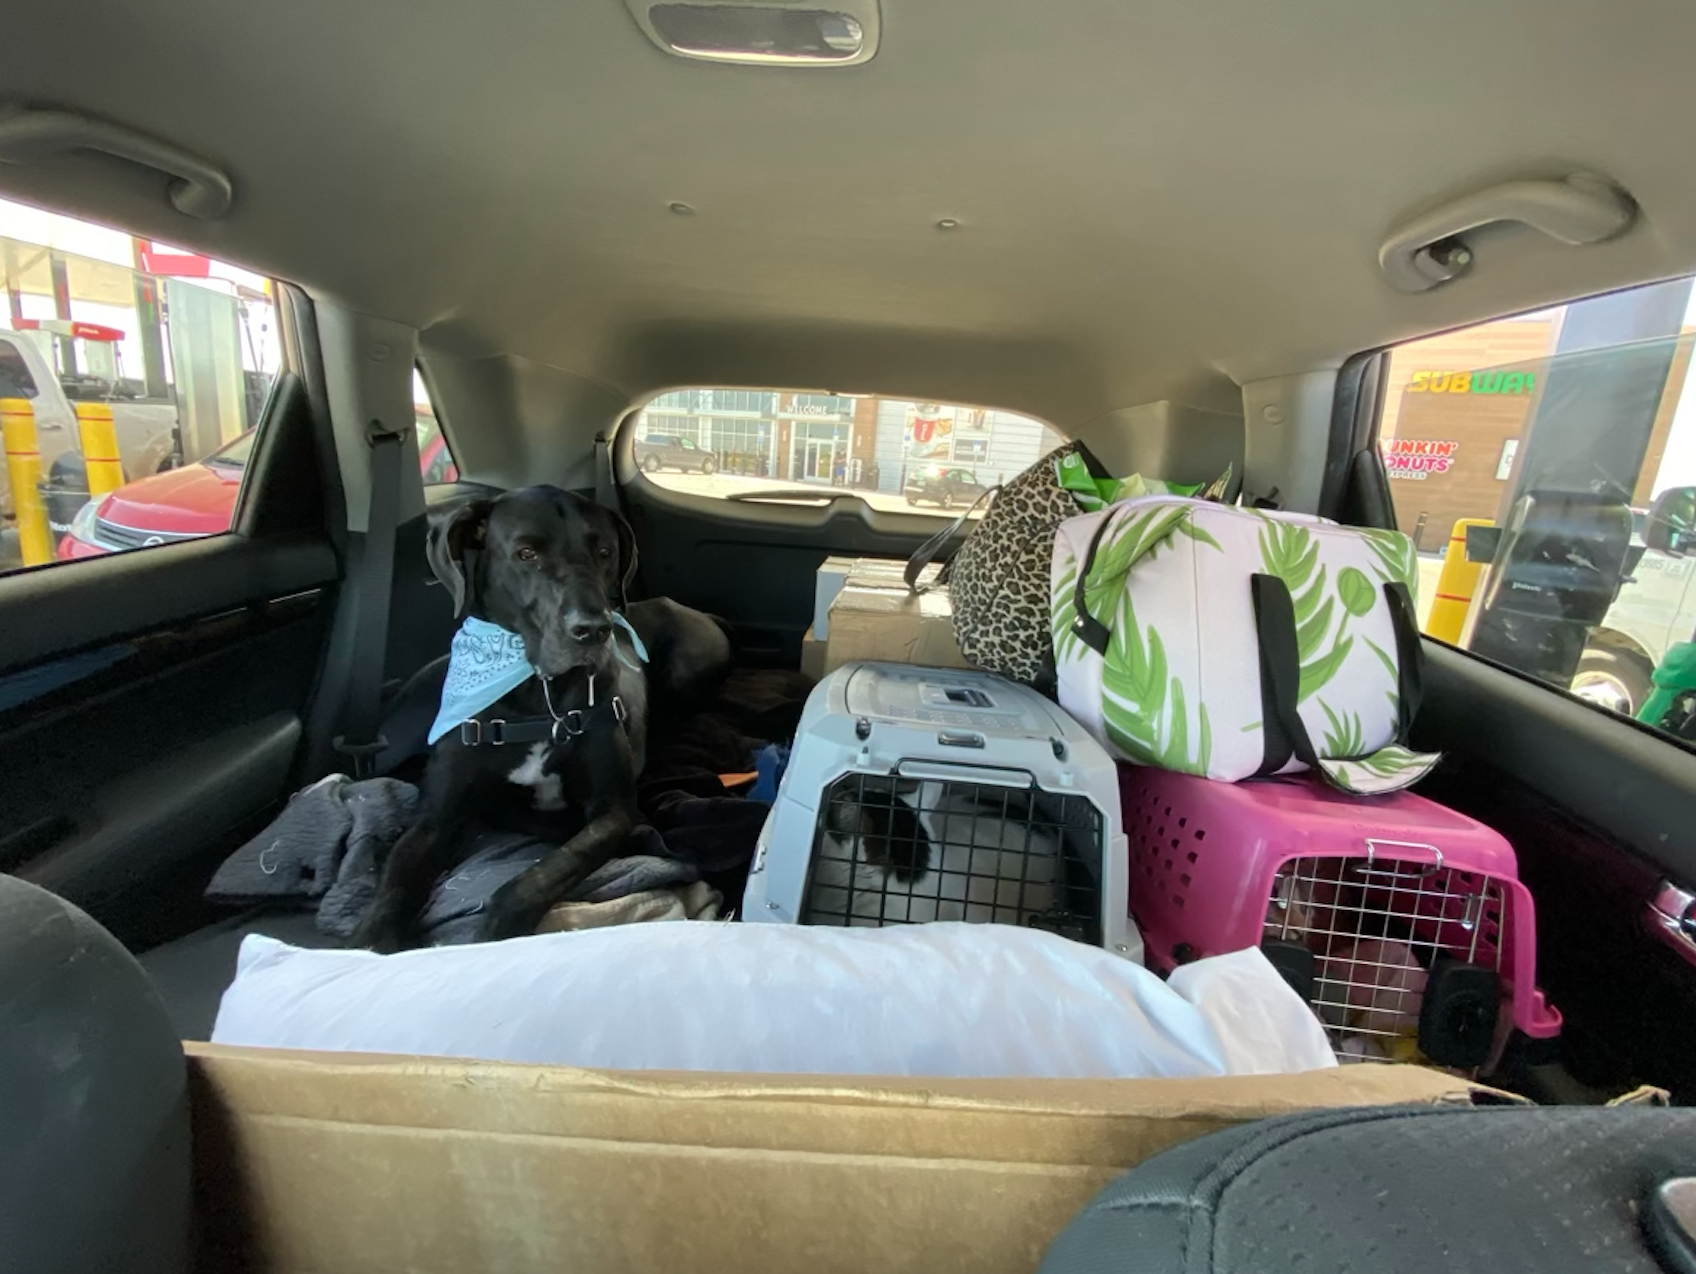 moving series part 2: long road trips with pets, moving with pets, how to survive long car rides with pets, drugs for pets while riding in the car, how to move with pets, tips and tricks for moving with your dogs and cats, great dane, moving to los …